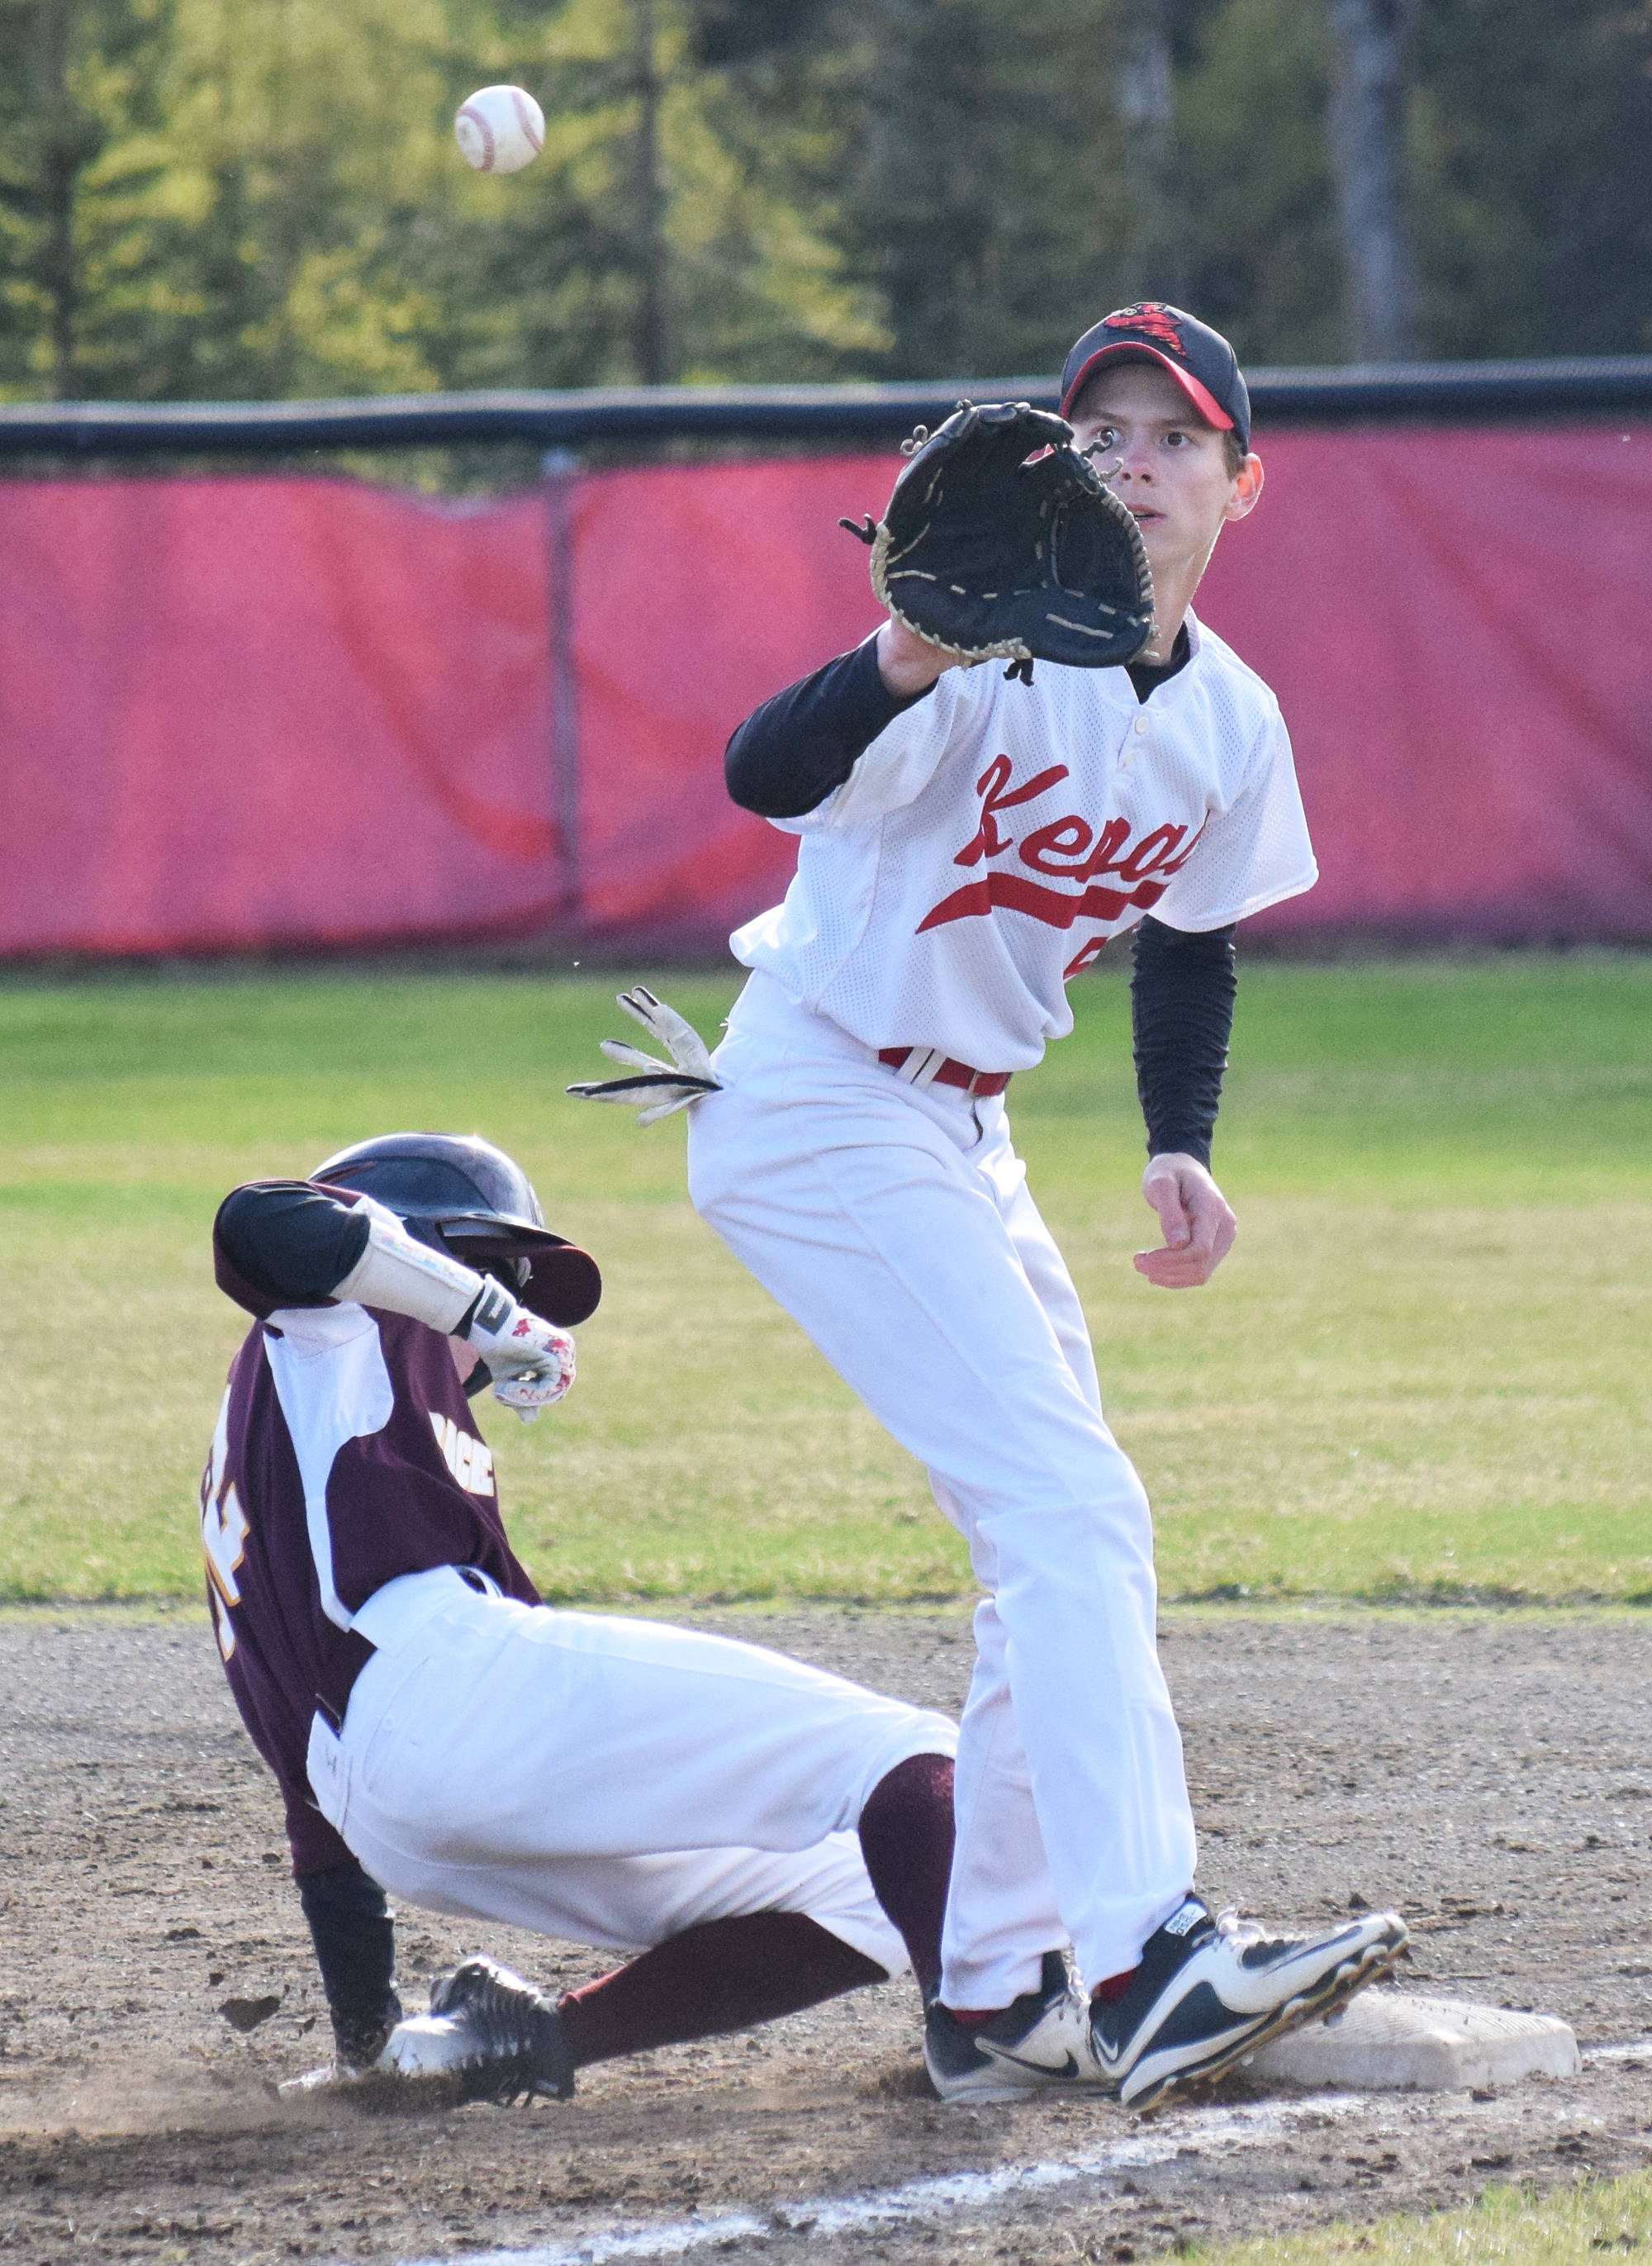 Kenai Central first baseman Levi Mese attempts to put out Grace Christian’s Parker Hovila, Friday evening at the Kenai Little League Fields. (Photo by Joey Klecka/Peninsula Clarion)